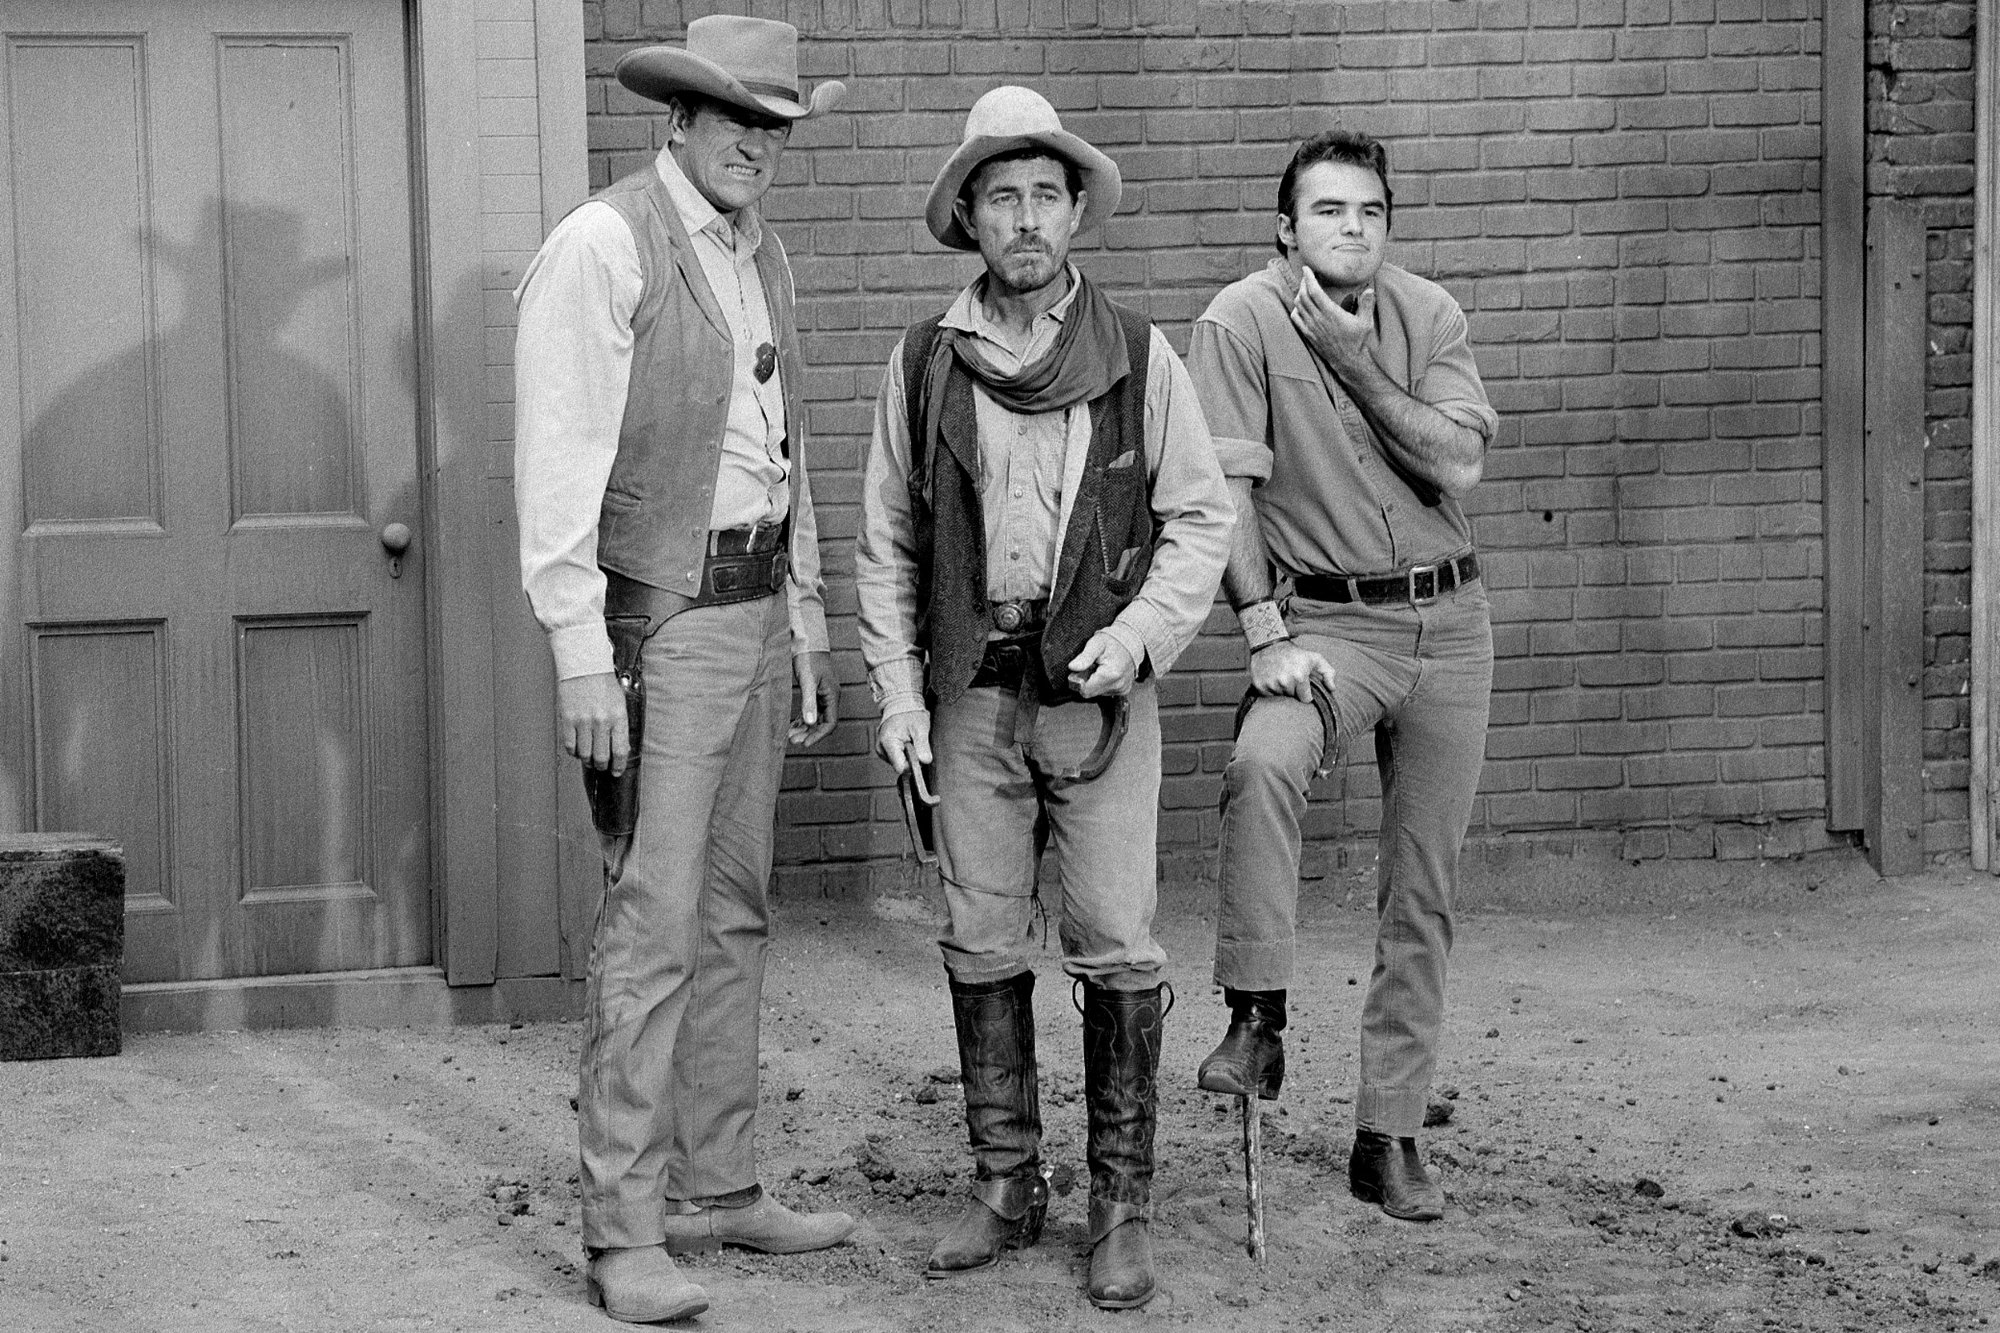 'Gunsmoke' James Arness as Matt Dillon, Ken Curtis as Festus Haggen, and Burt Reynolds as Quint Asper. They're standing in front of an old Western building making funny faces.